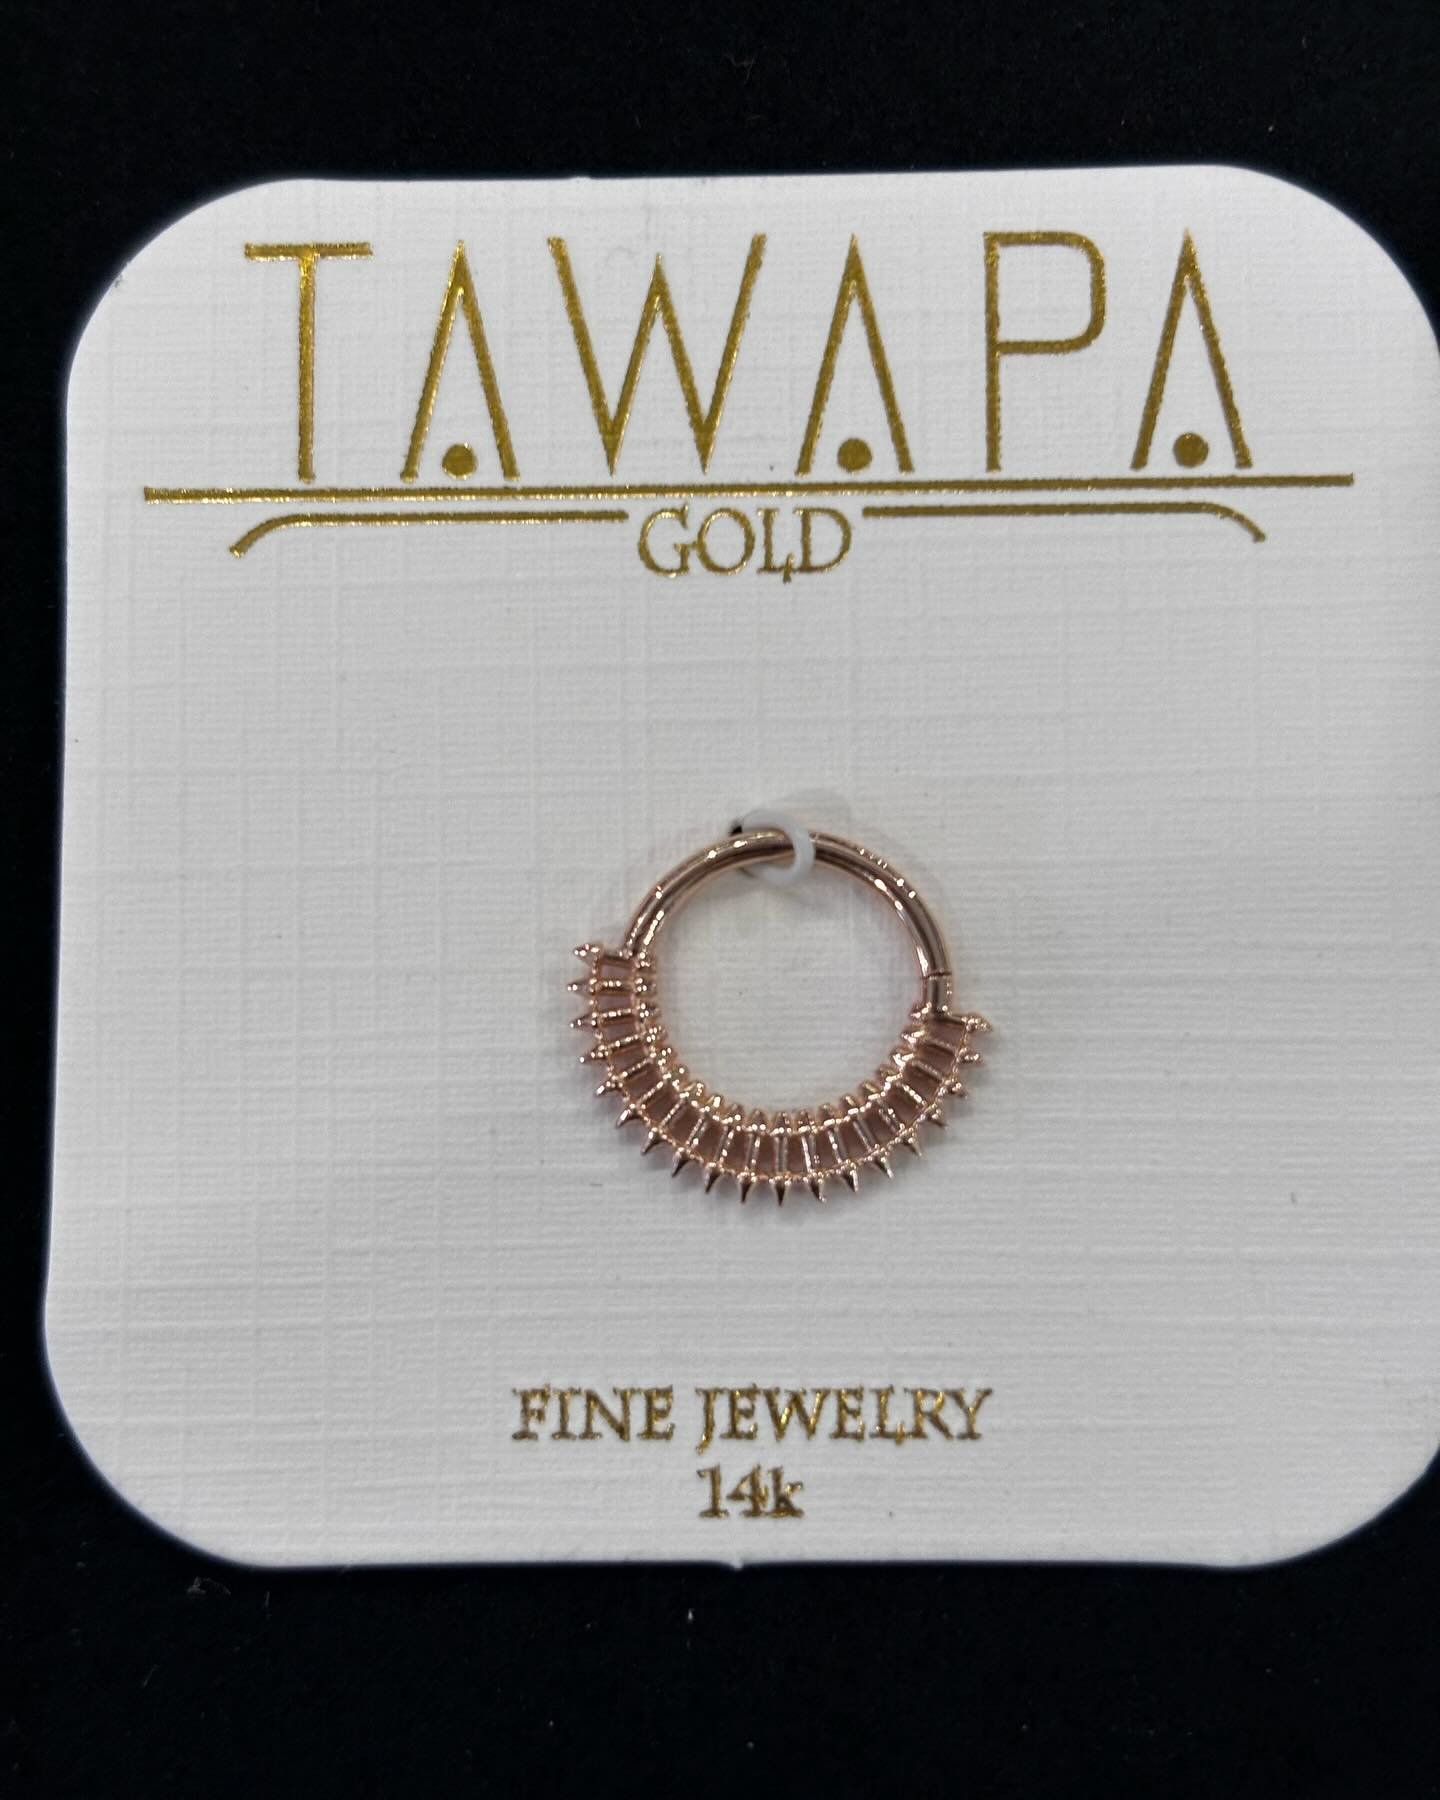 Ooooo baby! We got some new cuties from @tawapa 
These would look great in a septum, helix or daith! Come check them out! 

#14kgold #septumpiercing #septumjewelry #bodyjewelry #goldjewelry #blingpiercing #piercing #piercingjewelry #jewelryseptum #da